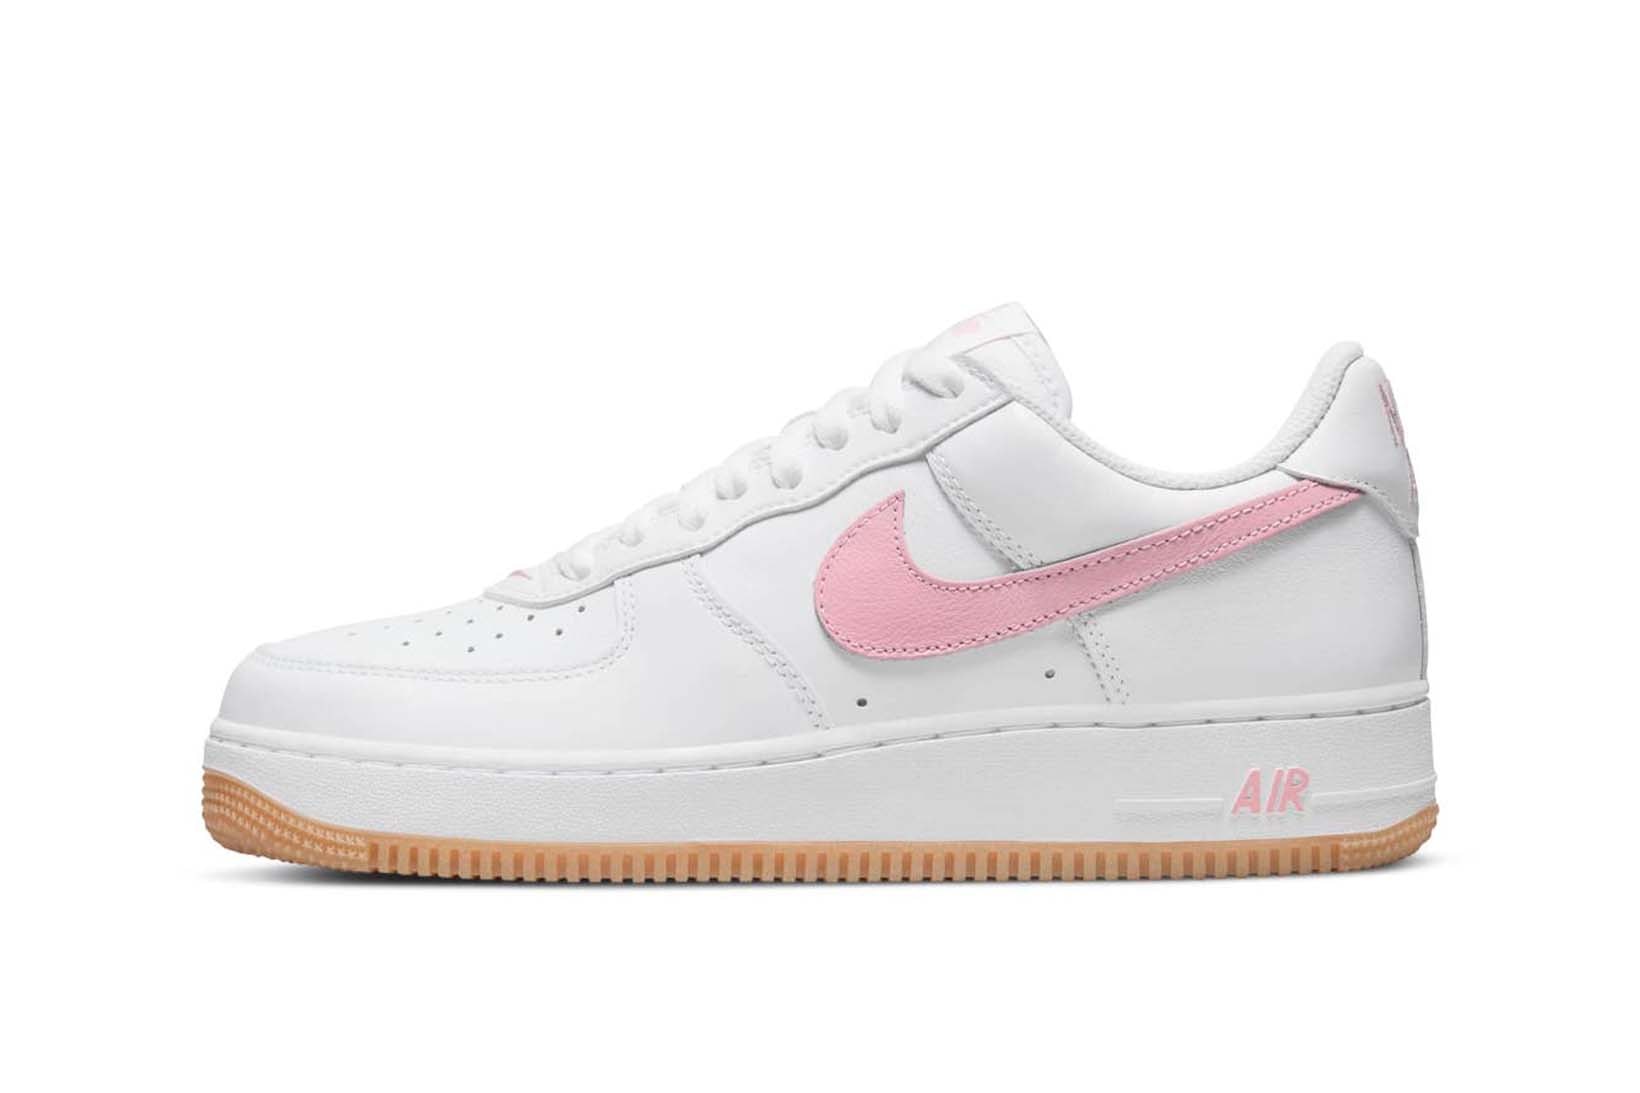 Nike Air Force 1 Low Since 82 White Pink Toothbrush DM0576-101 Price Release Date